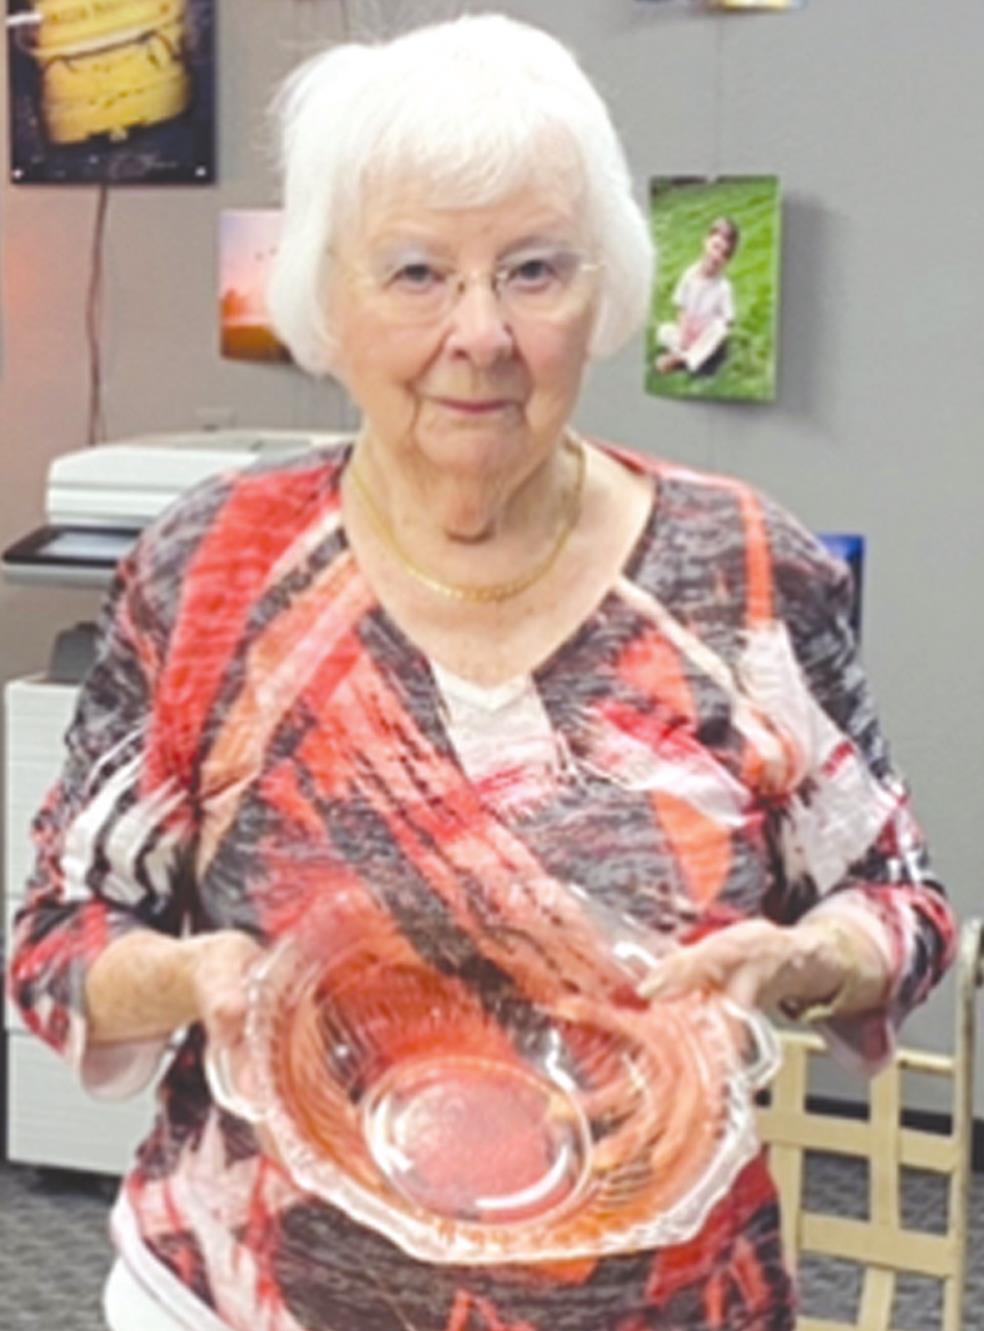 94-year-old Weatherford resident collects Depression glass